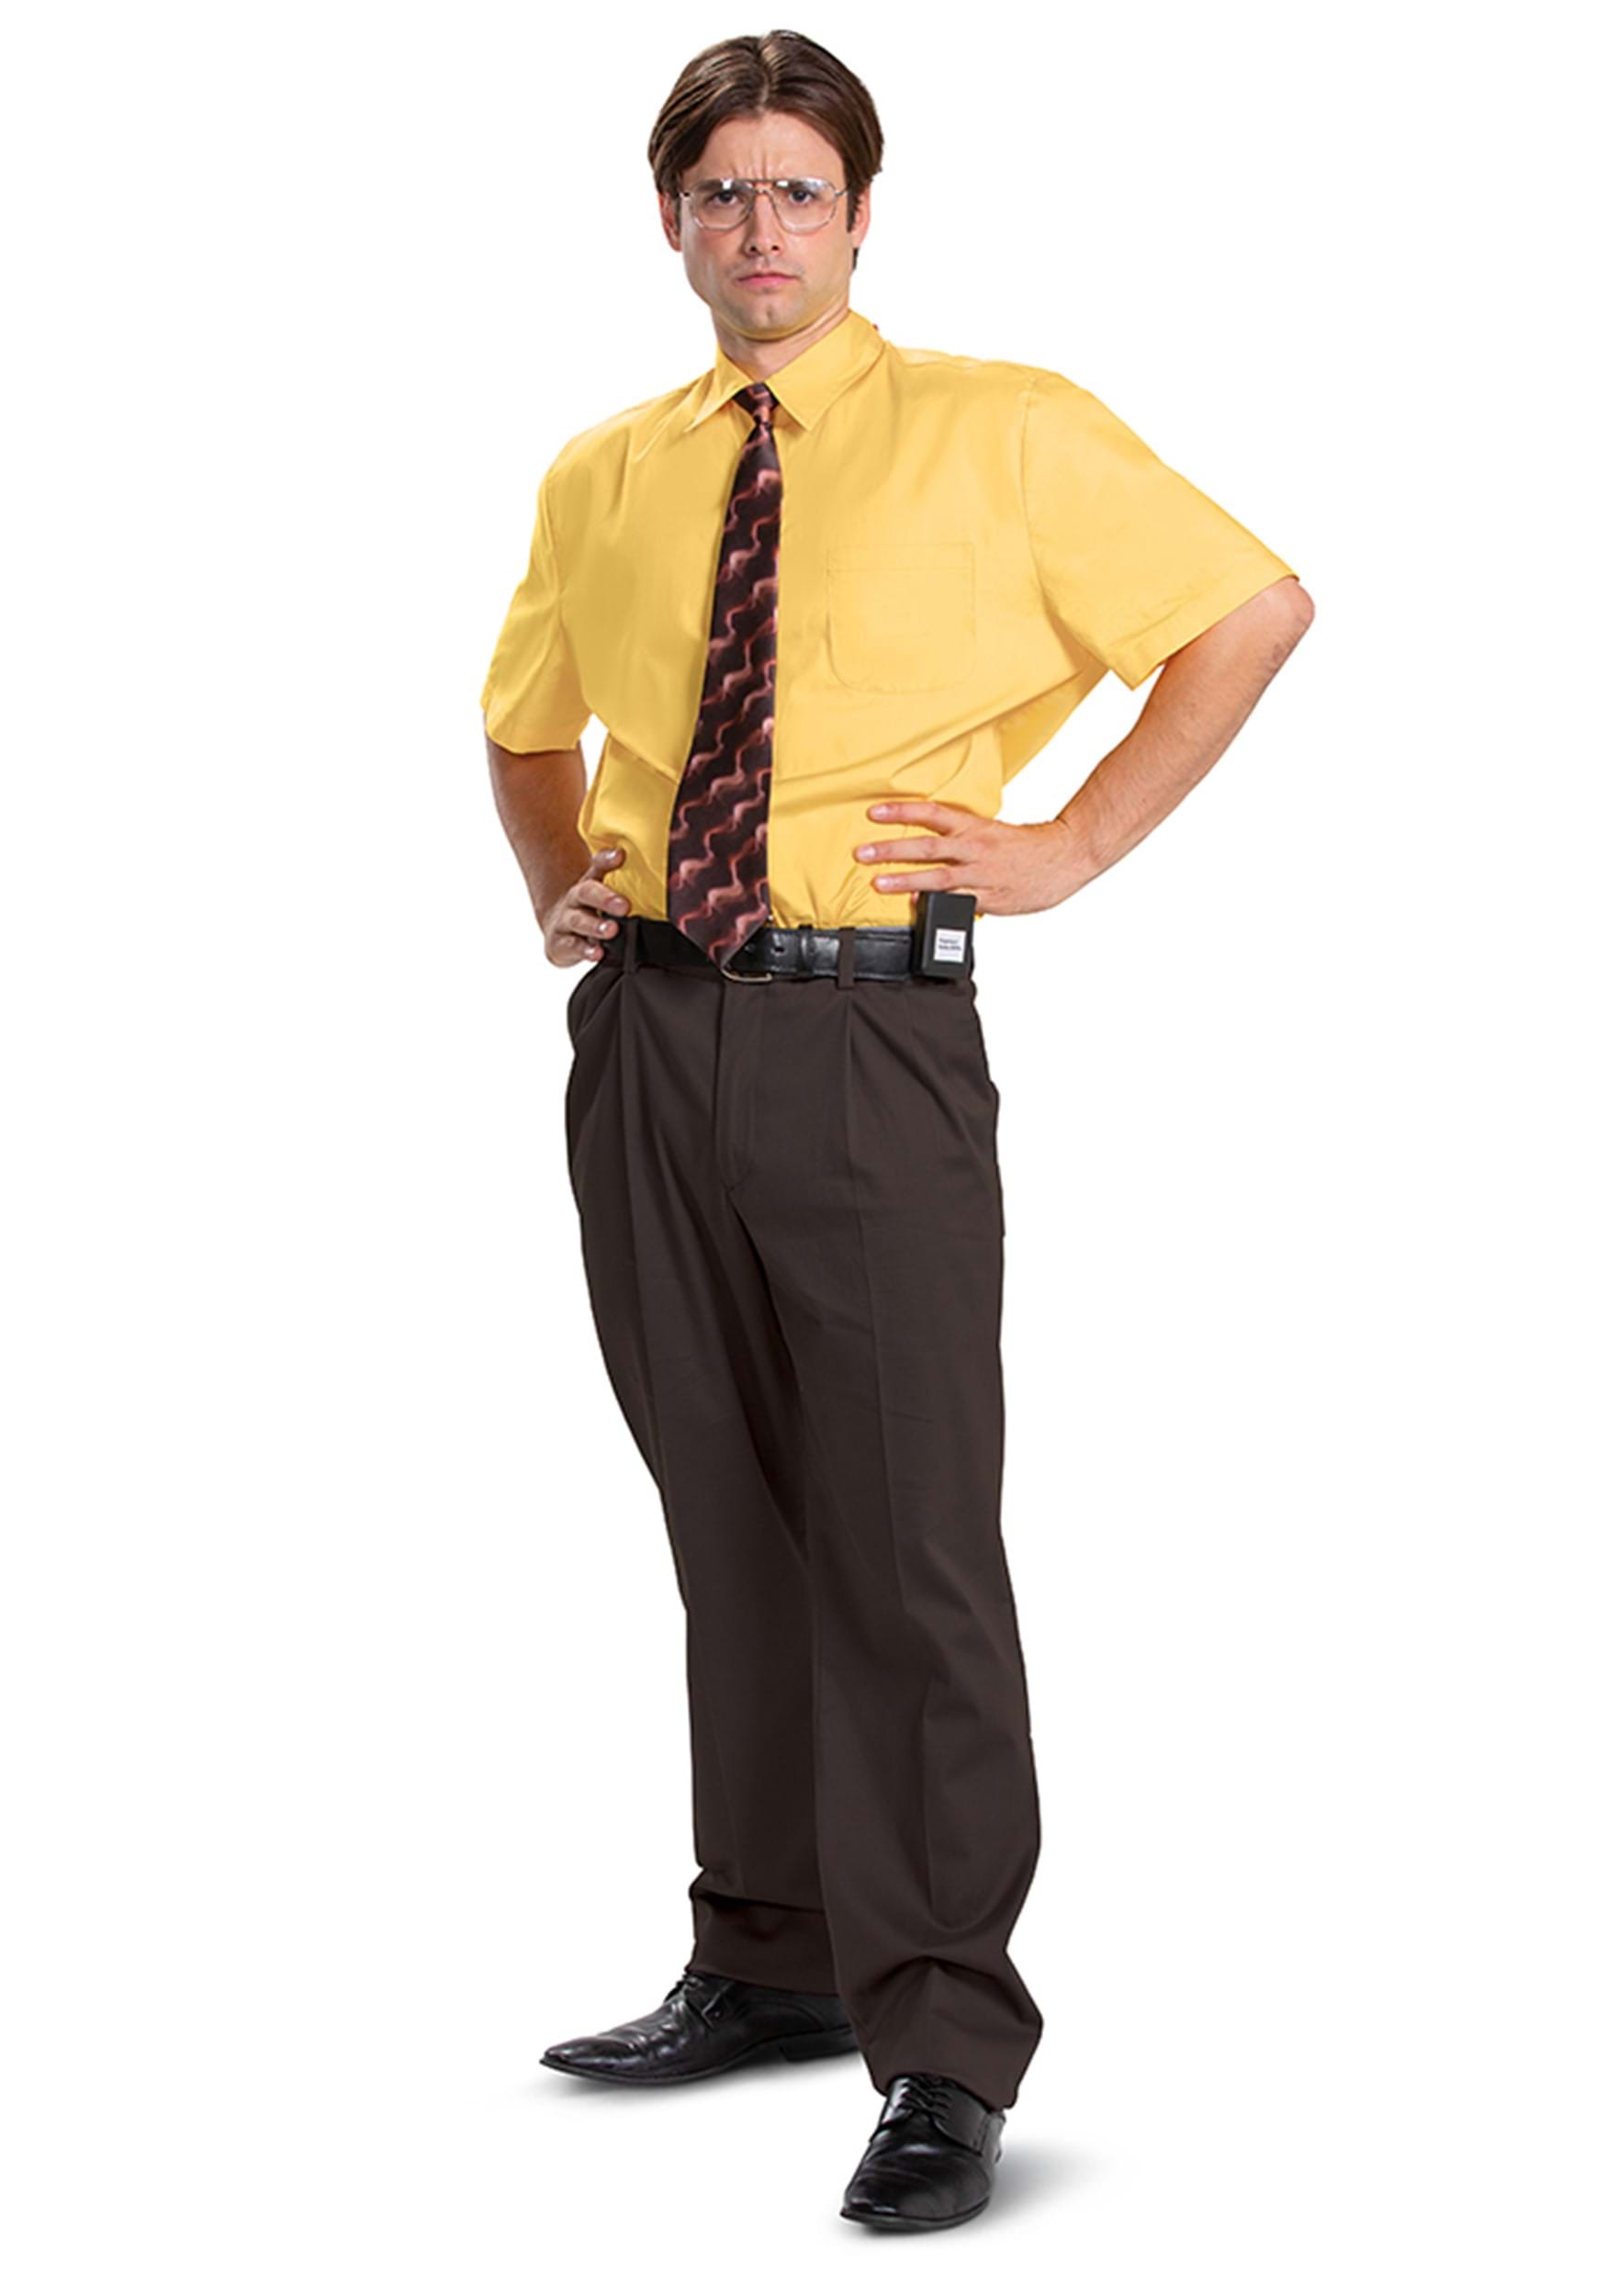 dwight schrute cosplay